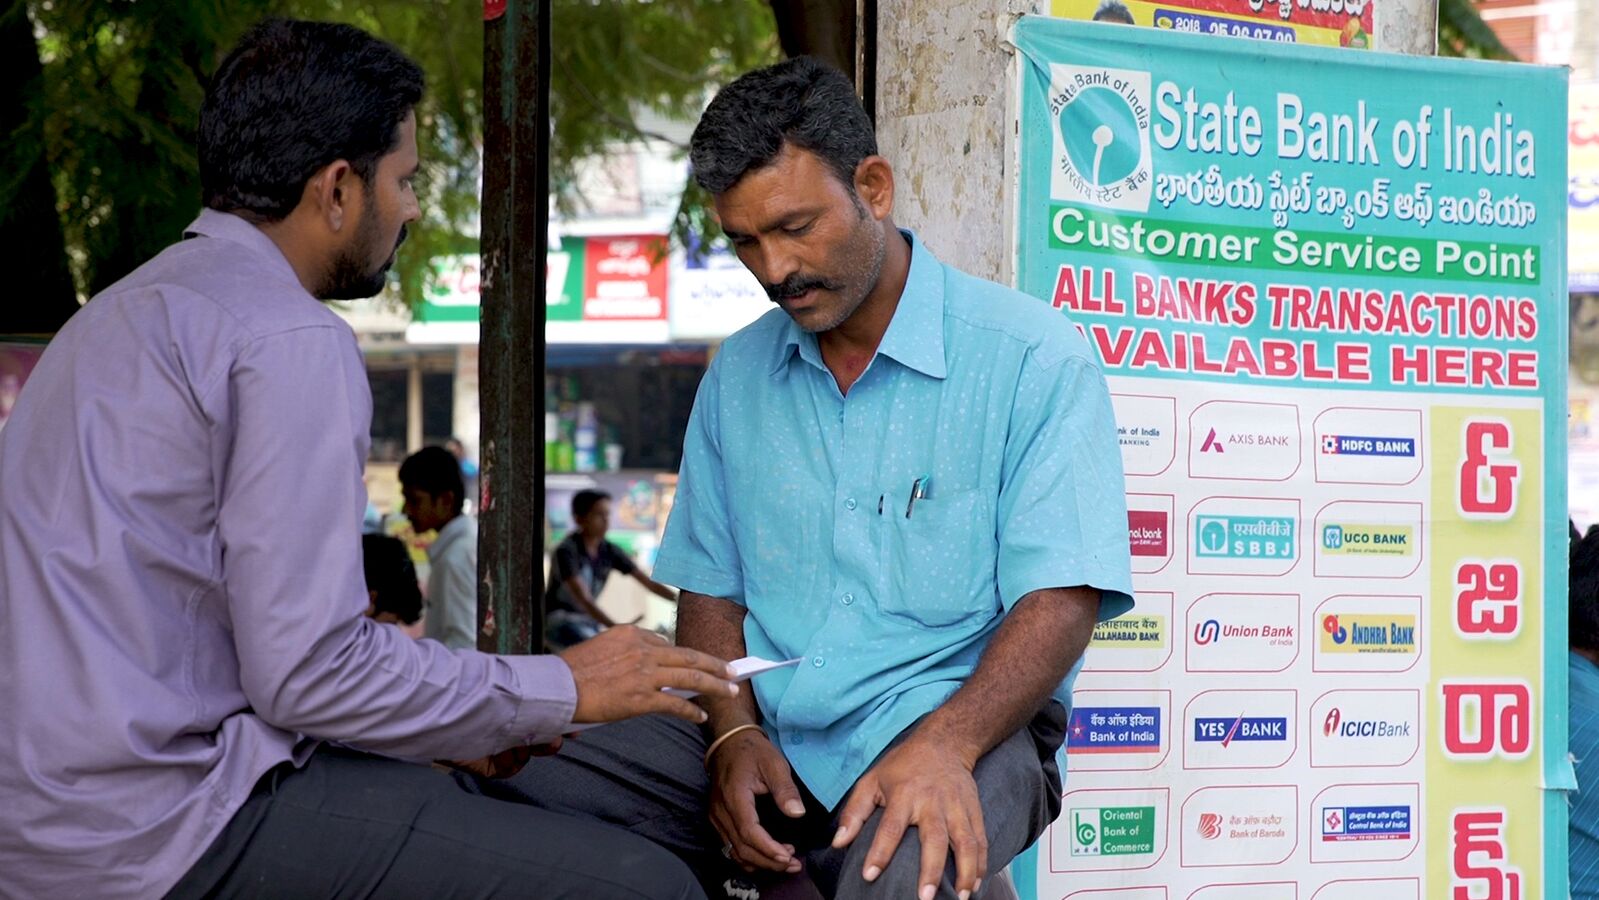 An Indian man signs up for affordable banking services